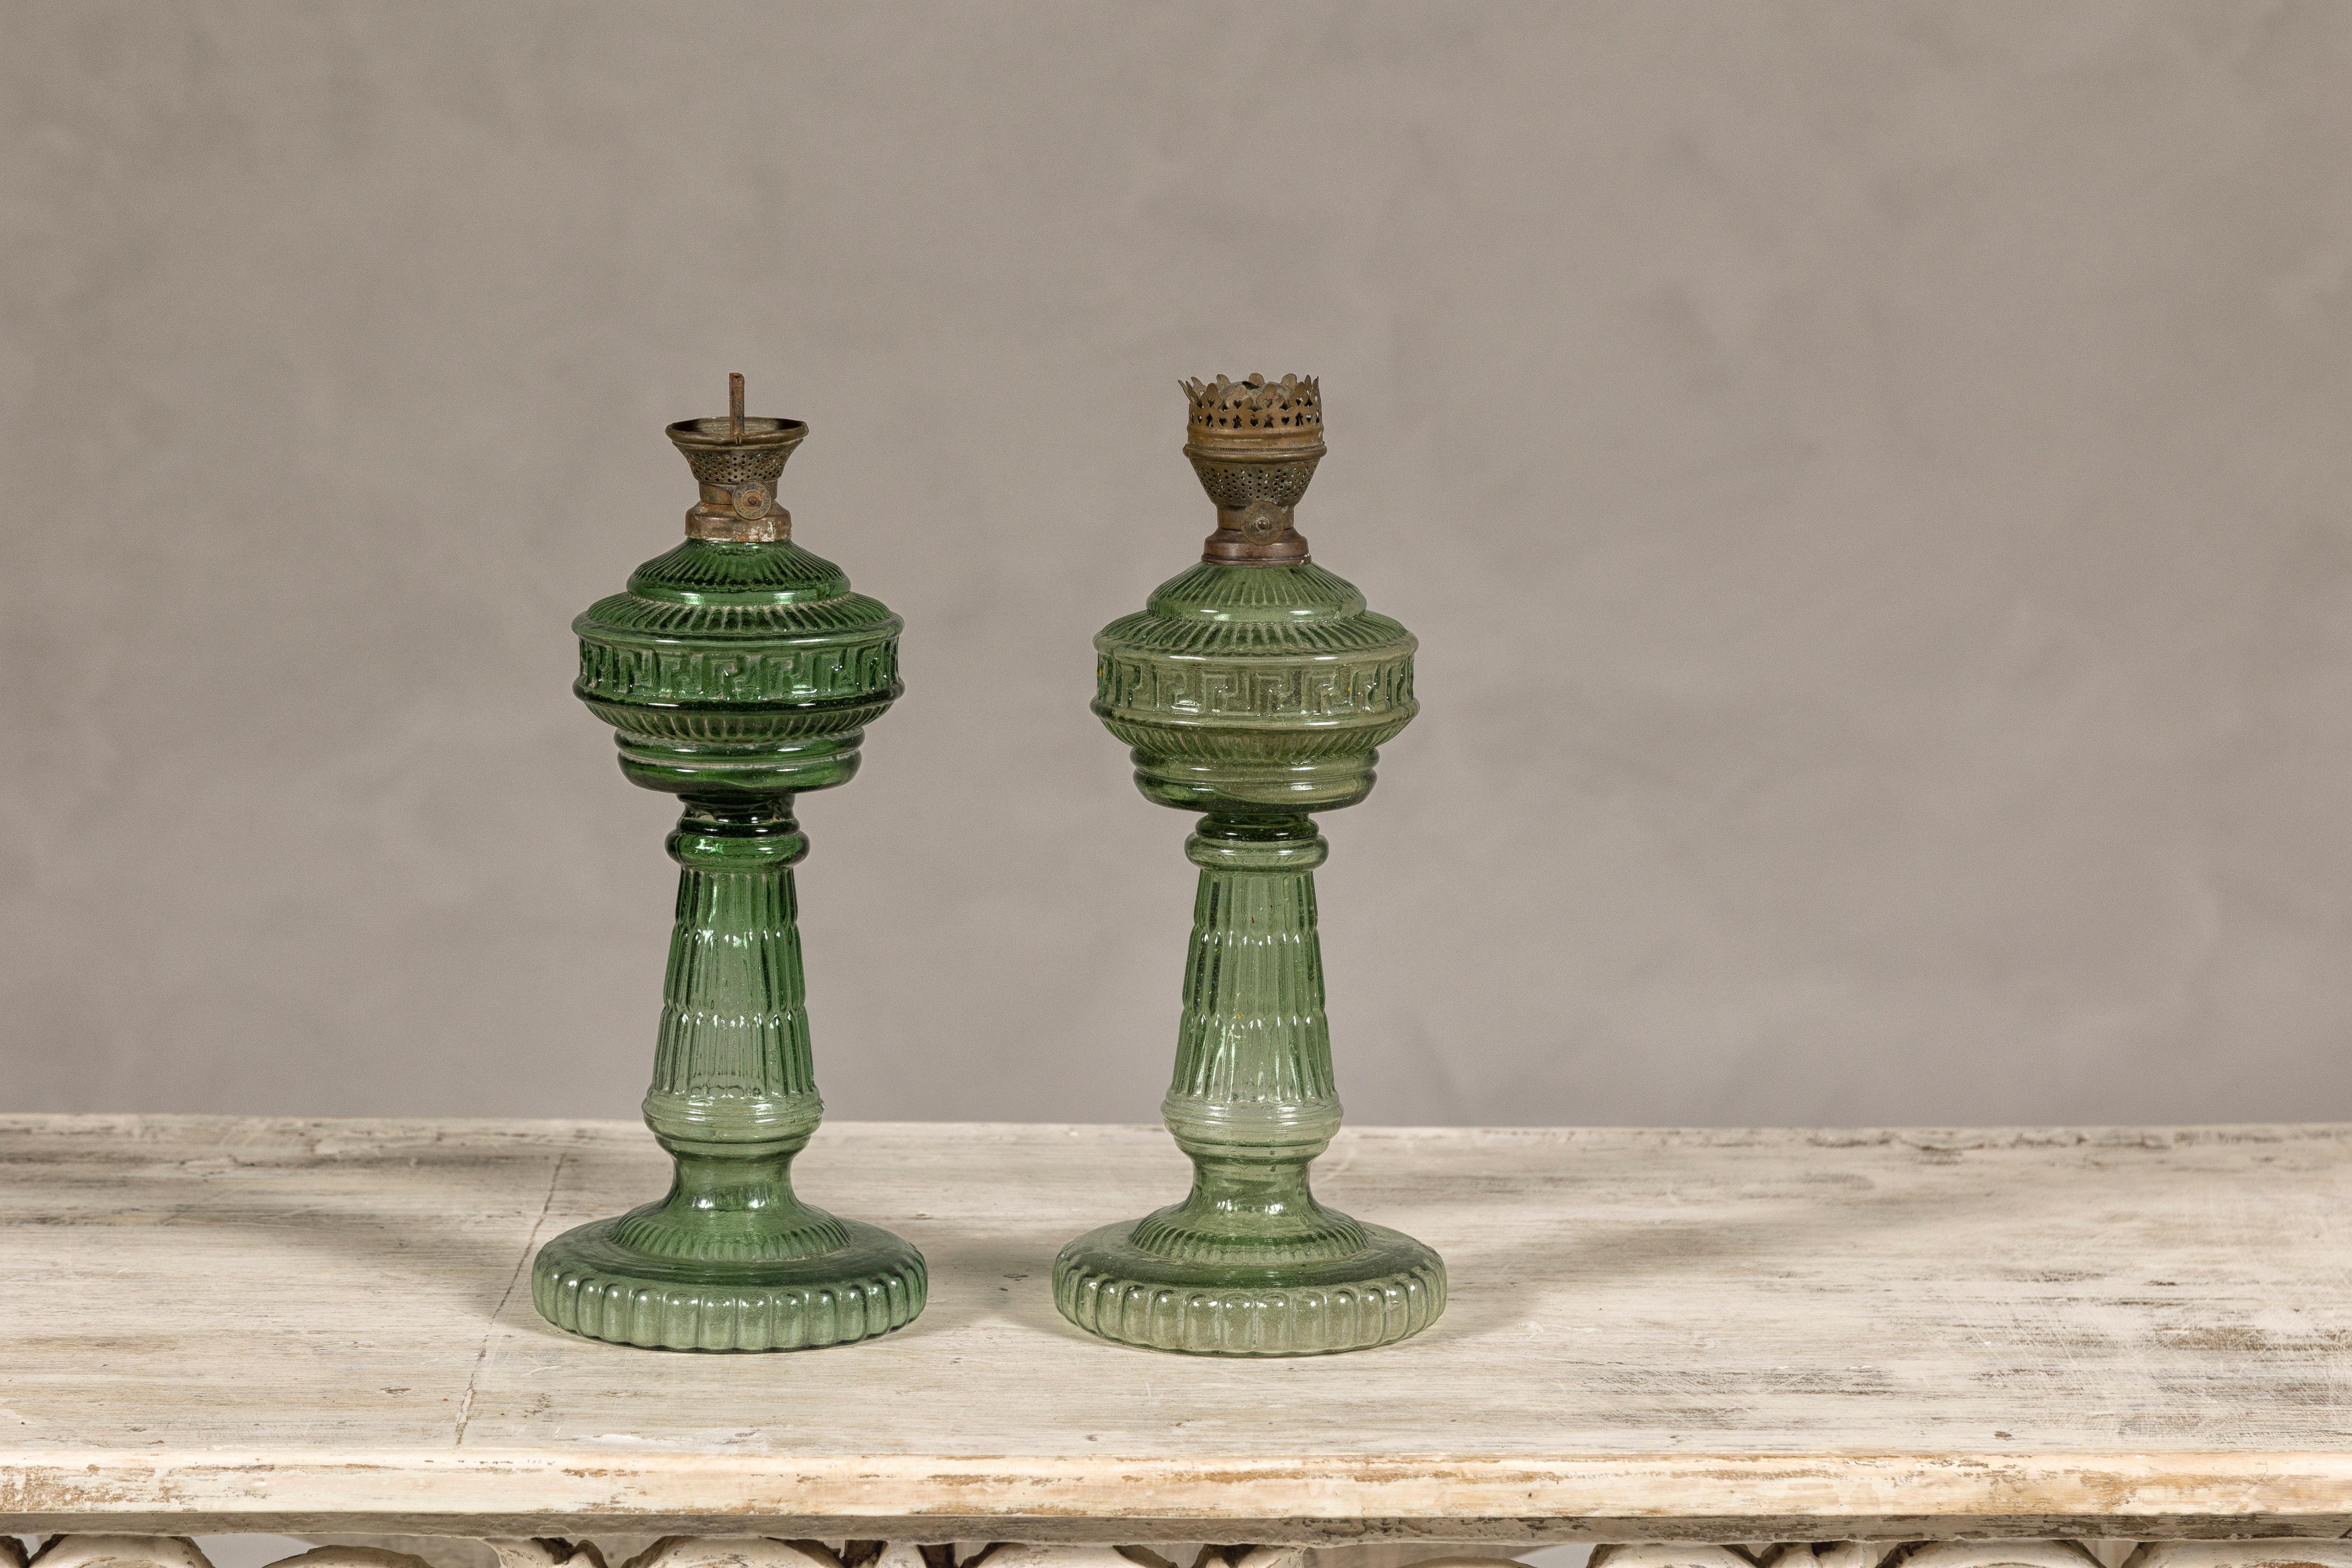 A near pair of green glass gas lights with meander friezes. Discover the unique charm and historical allure of this near pair of vintage Indian gas lights, a delightful find for those who appreciate the fusion of function and art. Crafted with green